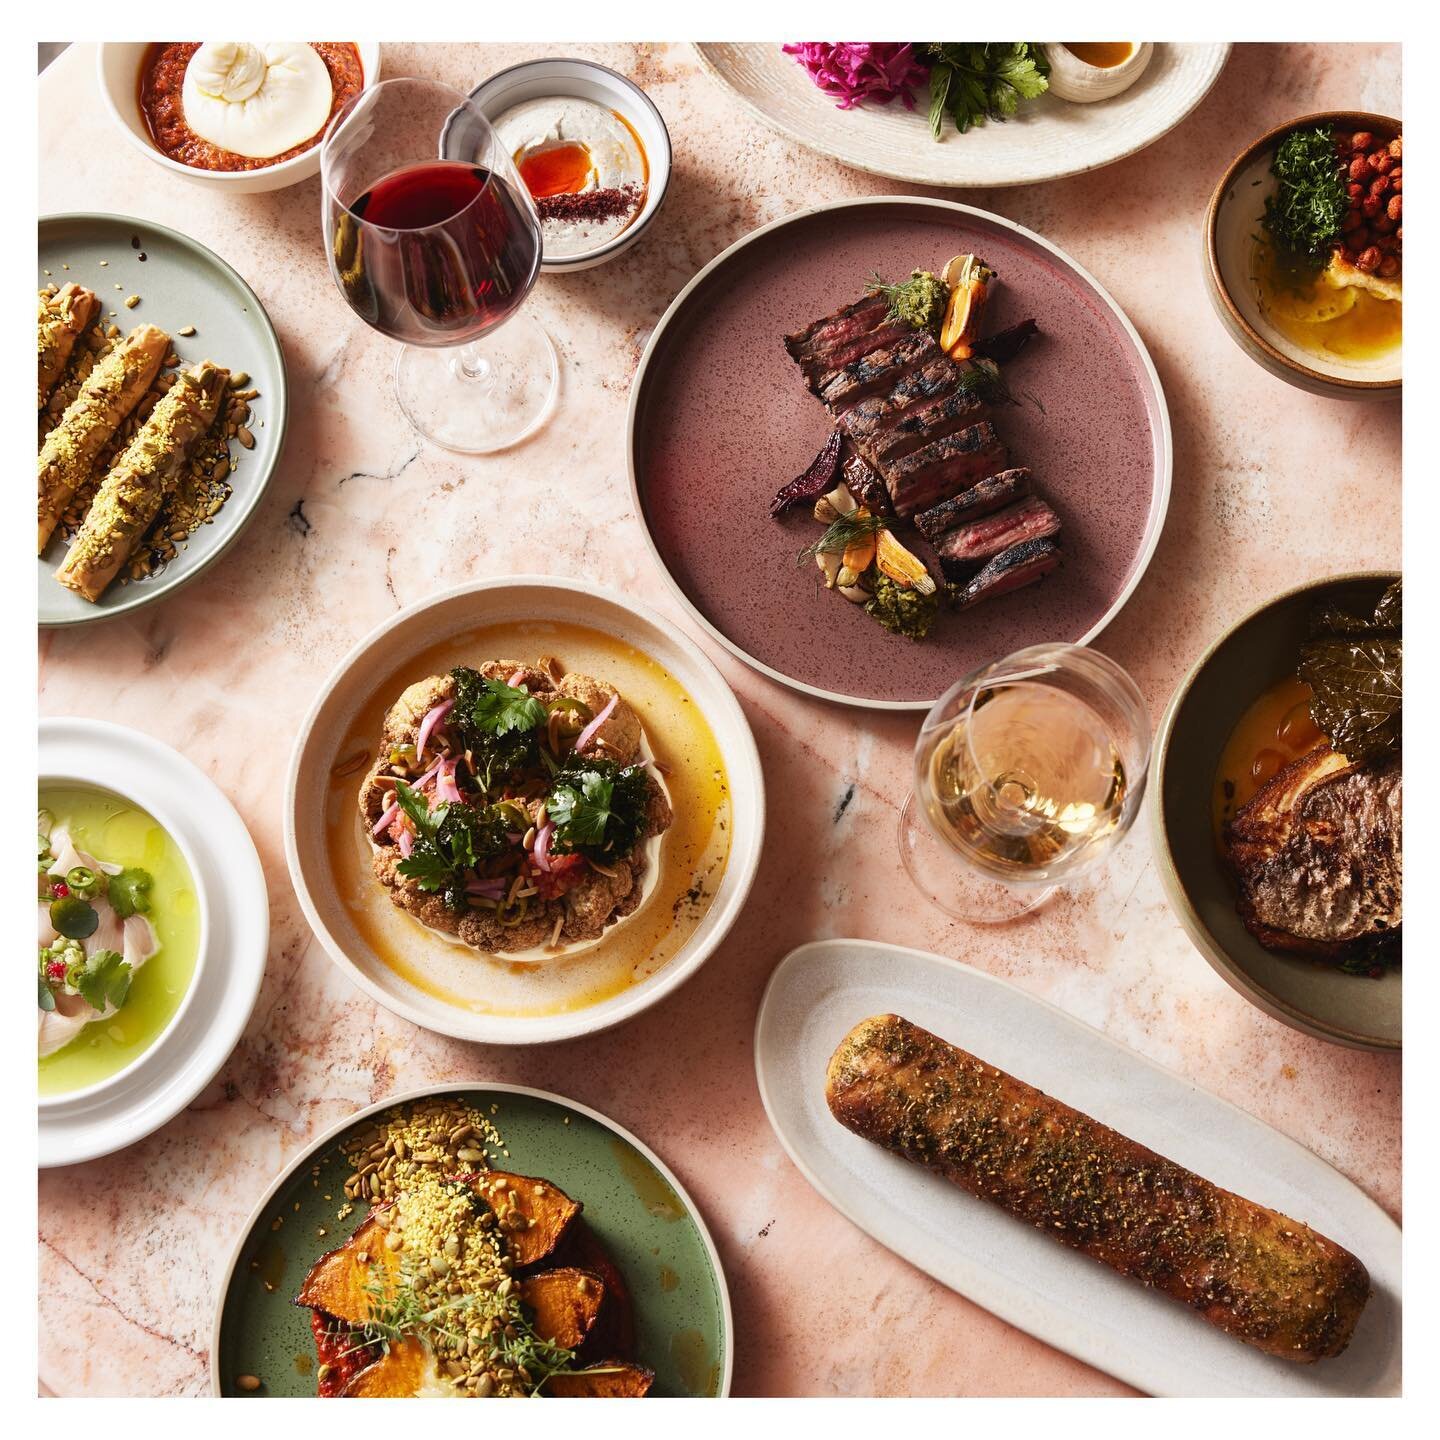 FEAST FOR THE SENSES: We&rsquo;ve had a busy start to the year and have some catching up to do on posting! Throwing back to recent work we did with sensational laneway hangout, @shaffasydney - a delightfully warm and welcoming Middle Eastern restaura